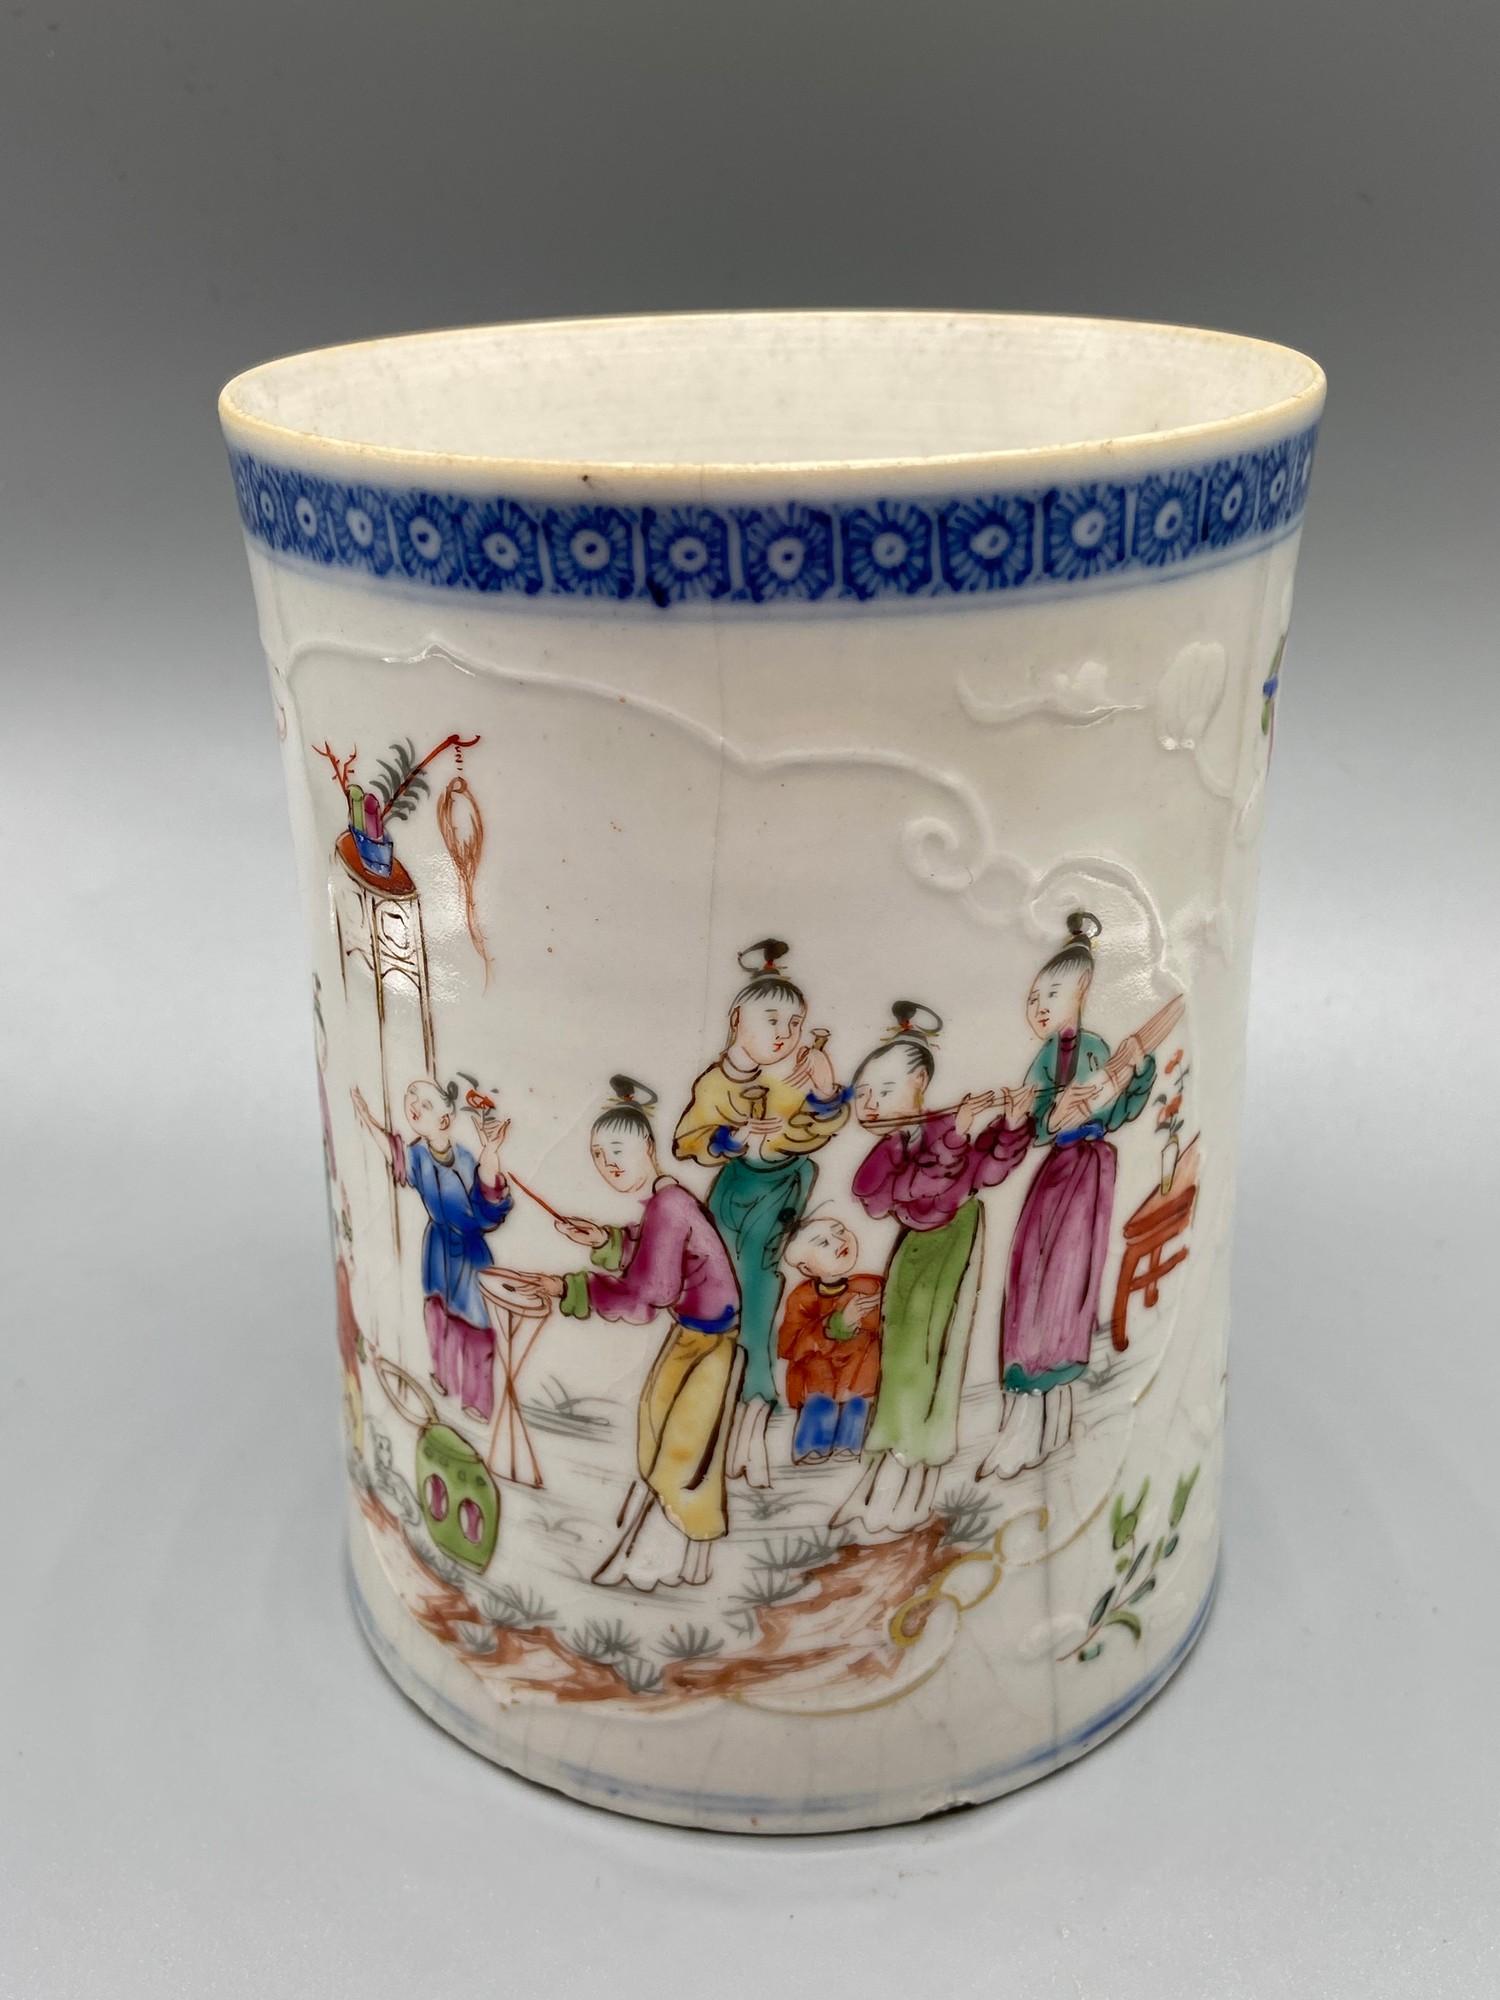 A large 19th century Chinese hand painted mug. Detailed with various hand painted figures and